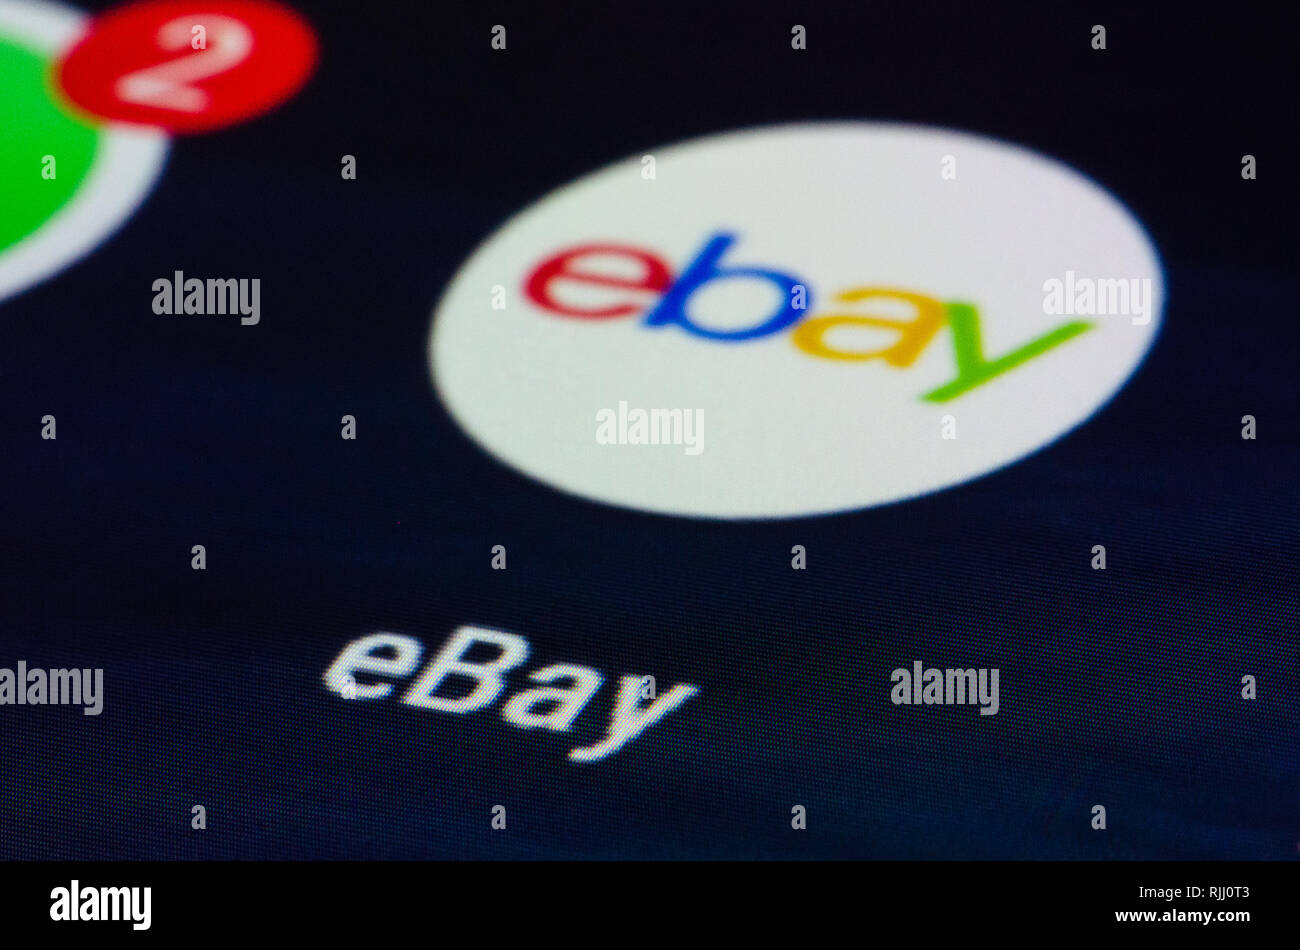 eBay app, is an American multinational e-commerce corporation that facilitates consumer-to-consumer and business-to-consumer sales through its website Stock Photo